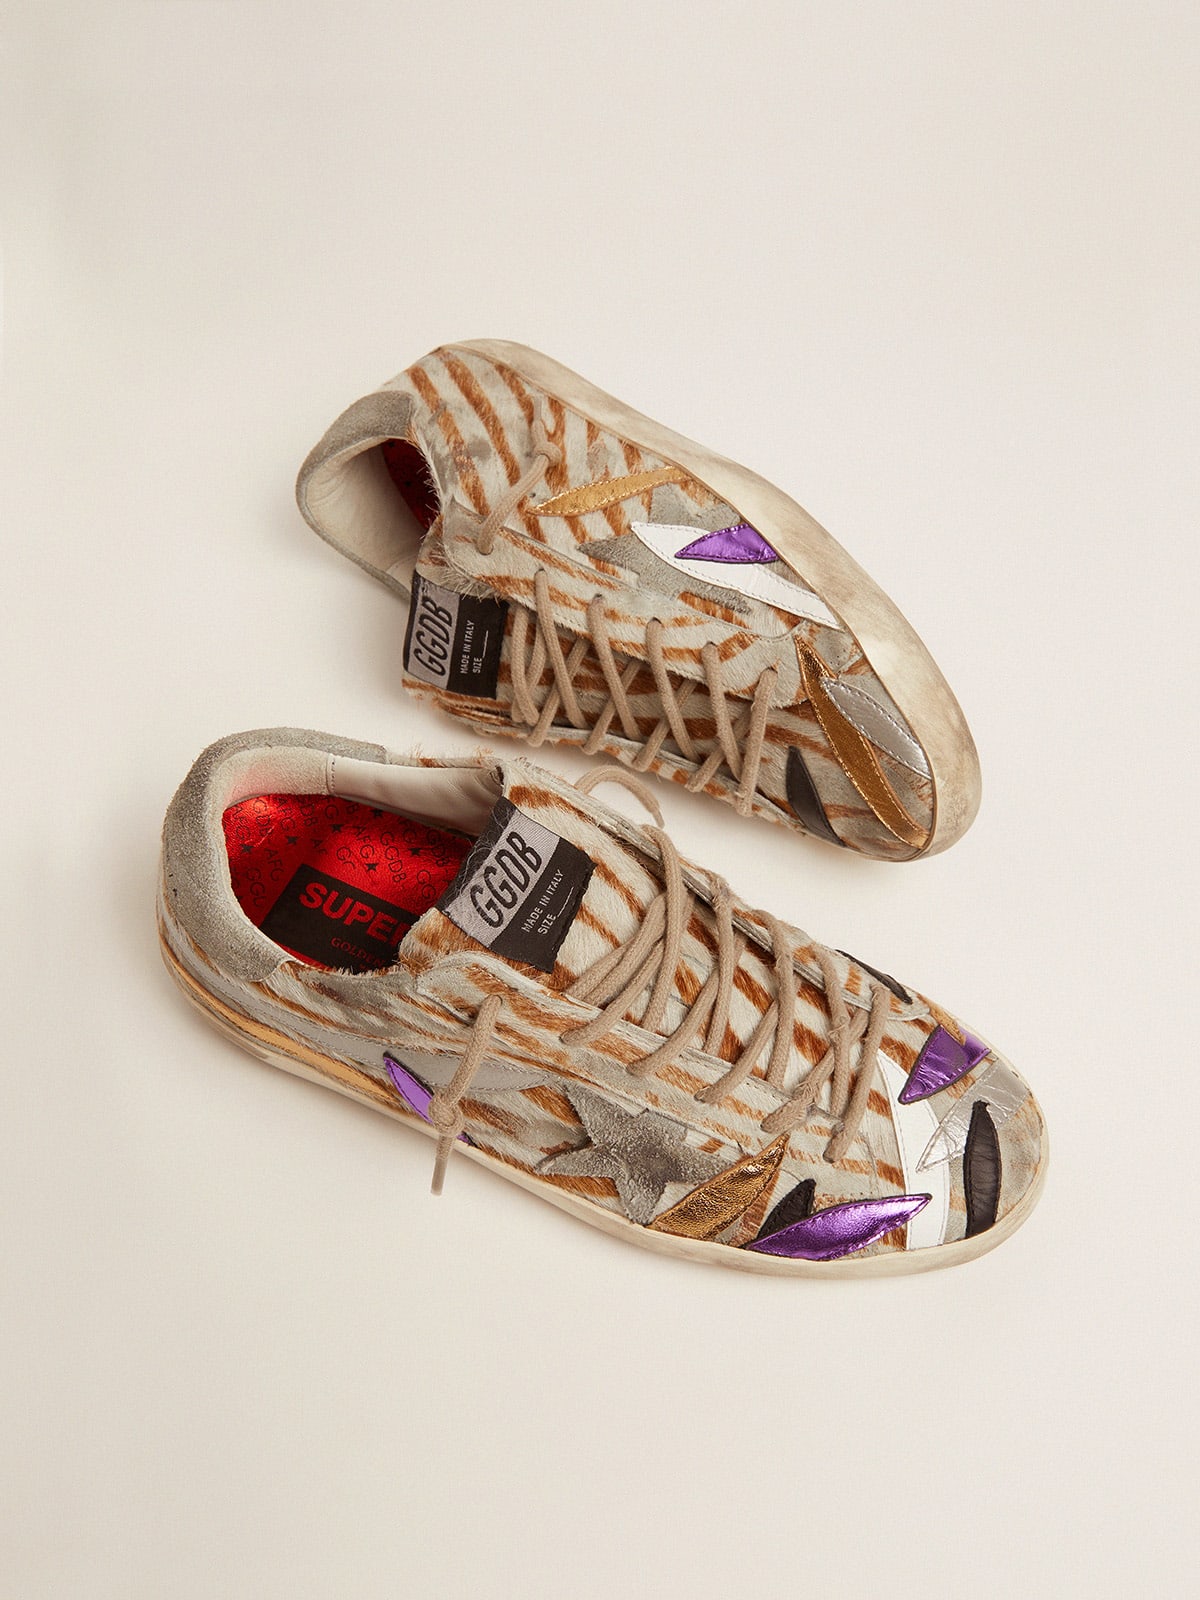 Golden Goose - Super-Star sneakers in zebra-print pony skin with colored laminated leather petals in 